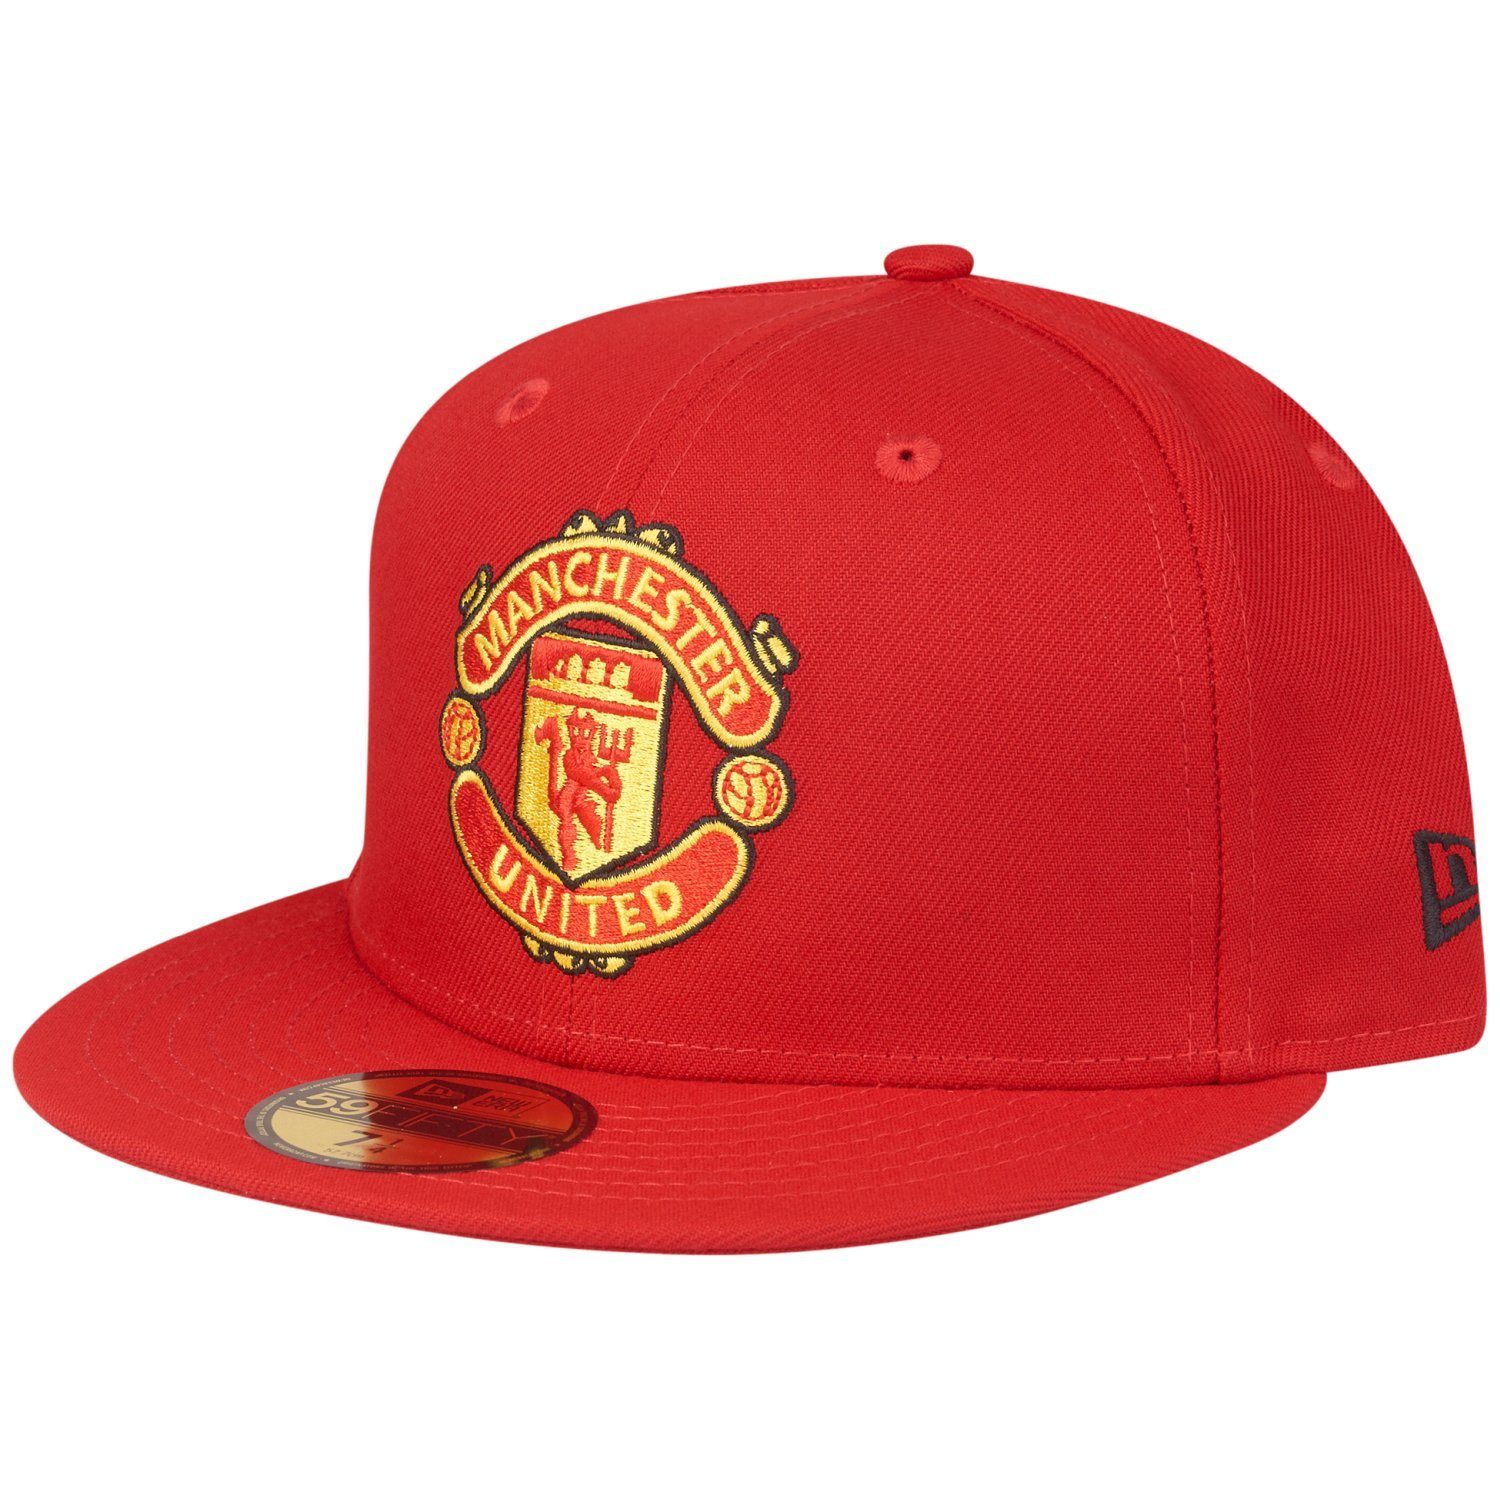 New Era Fitted Cap 59Fifty Manchester United F.C